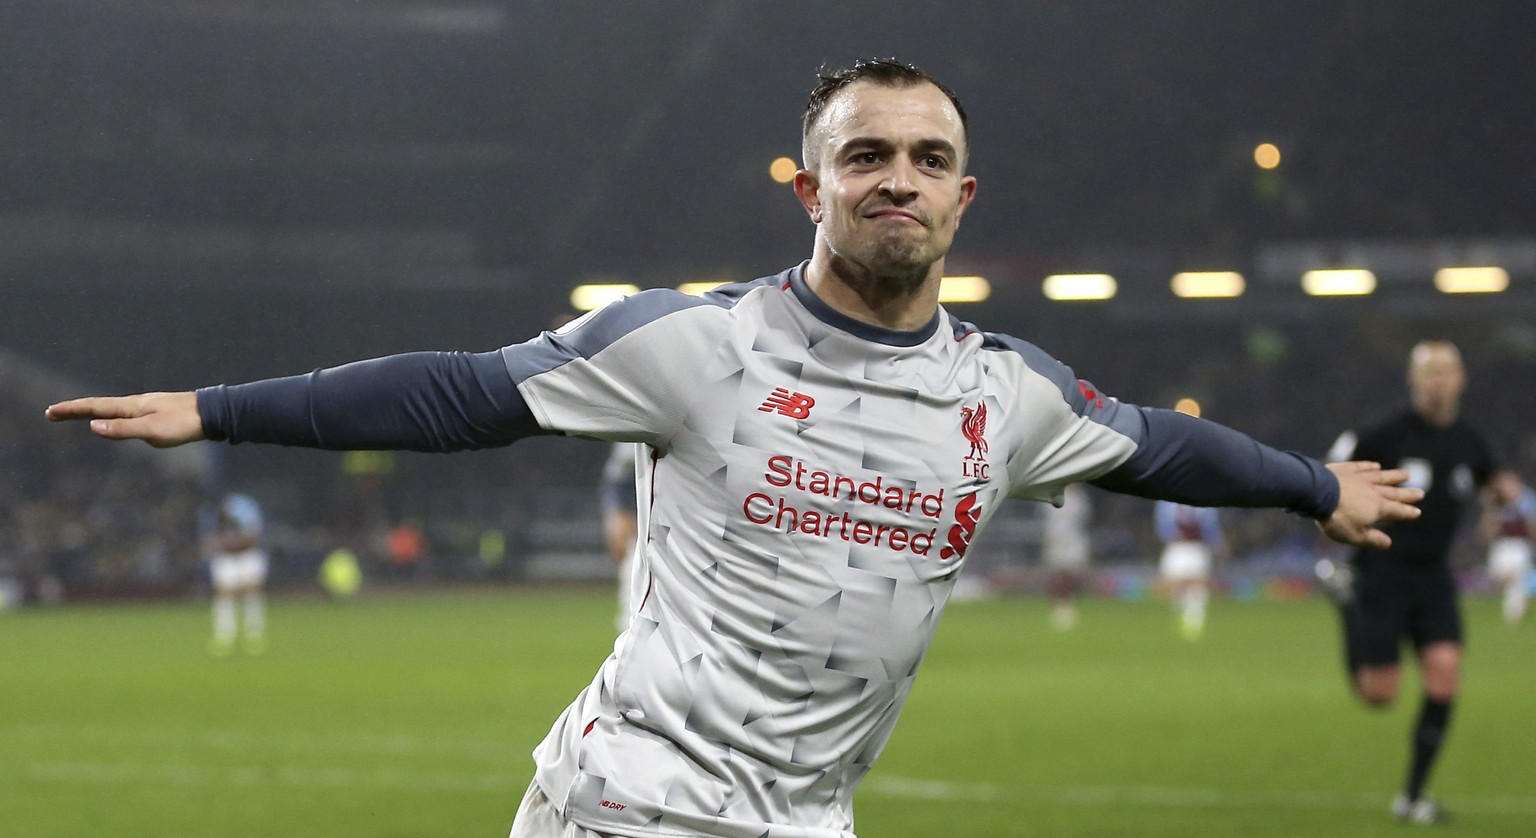 Liverpool&#039;s Xherdan Shaqiri scores his side&#039;s third goal of the game against Burnley, during their English Premier League soccer match at Turf Moor in Burnley, England, Wednesday Dec. 5, 201 ...